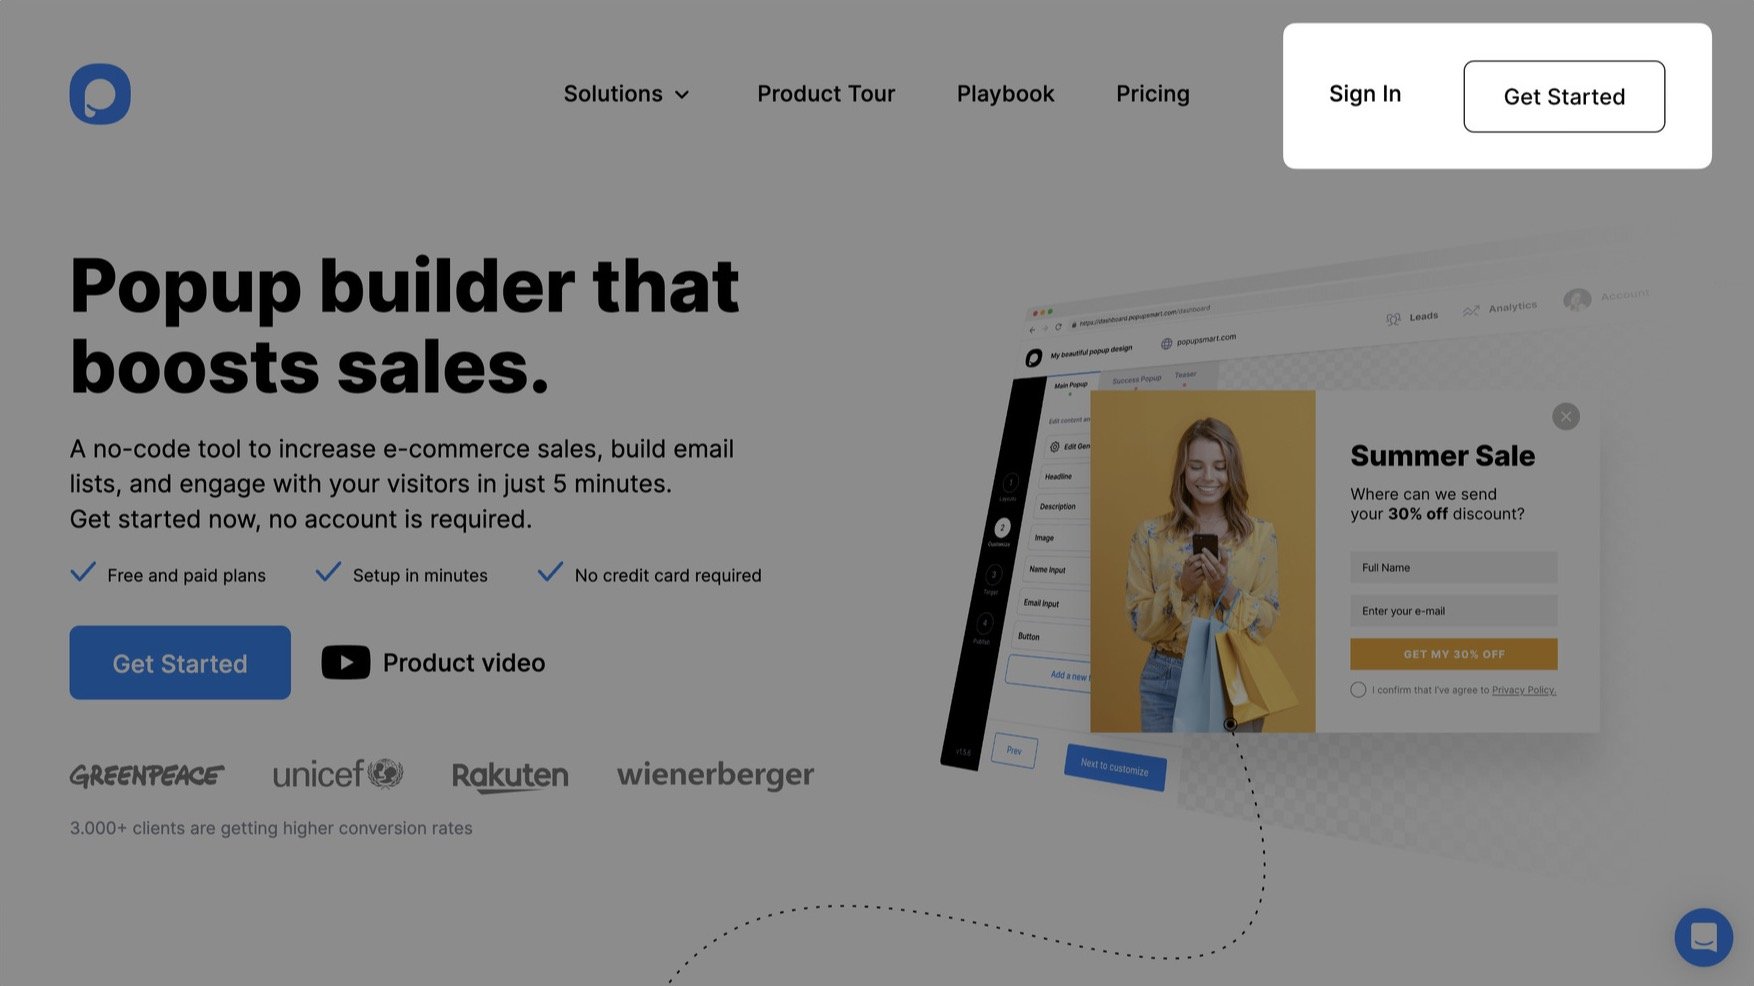 Popupsmart's homepage with the headline "Popup builder that boosts sales" on the left followed by a short descriptive text and "Get Started" and "Product Demo" buttons, showing "Sign In" and "Get Started" buttons highlighted